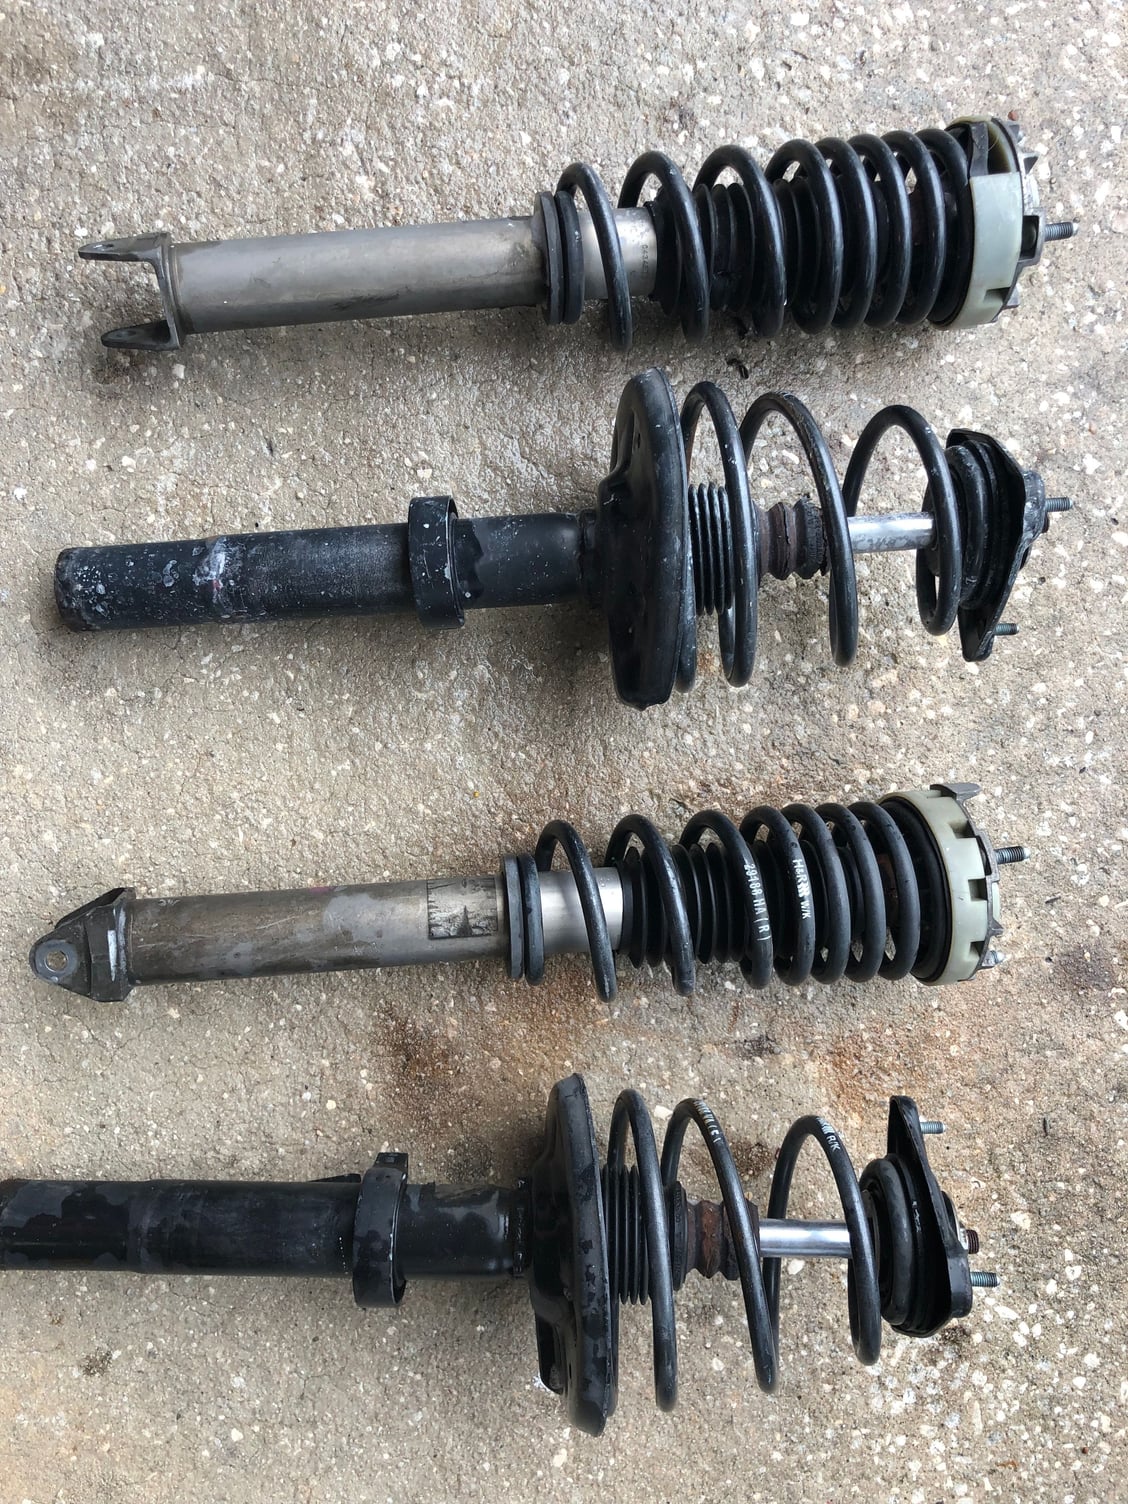 Steering/Suspension - 997.1 parts - Used - 2005 to 2011 Porsche 911 - Longwood, FL 32779, United States